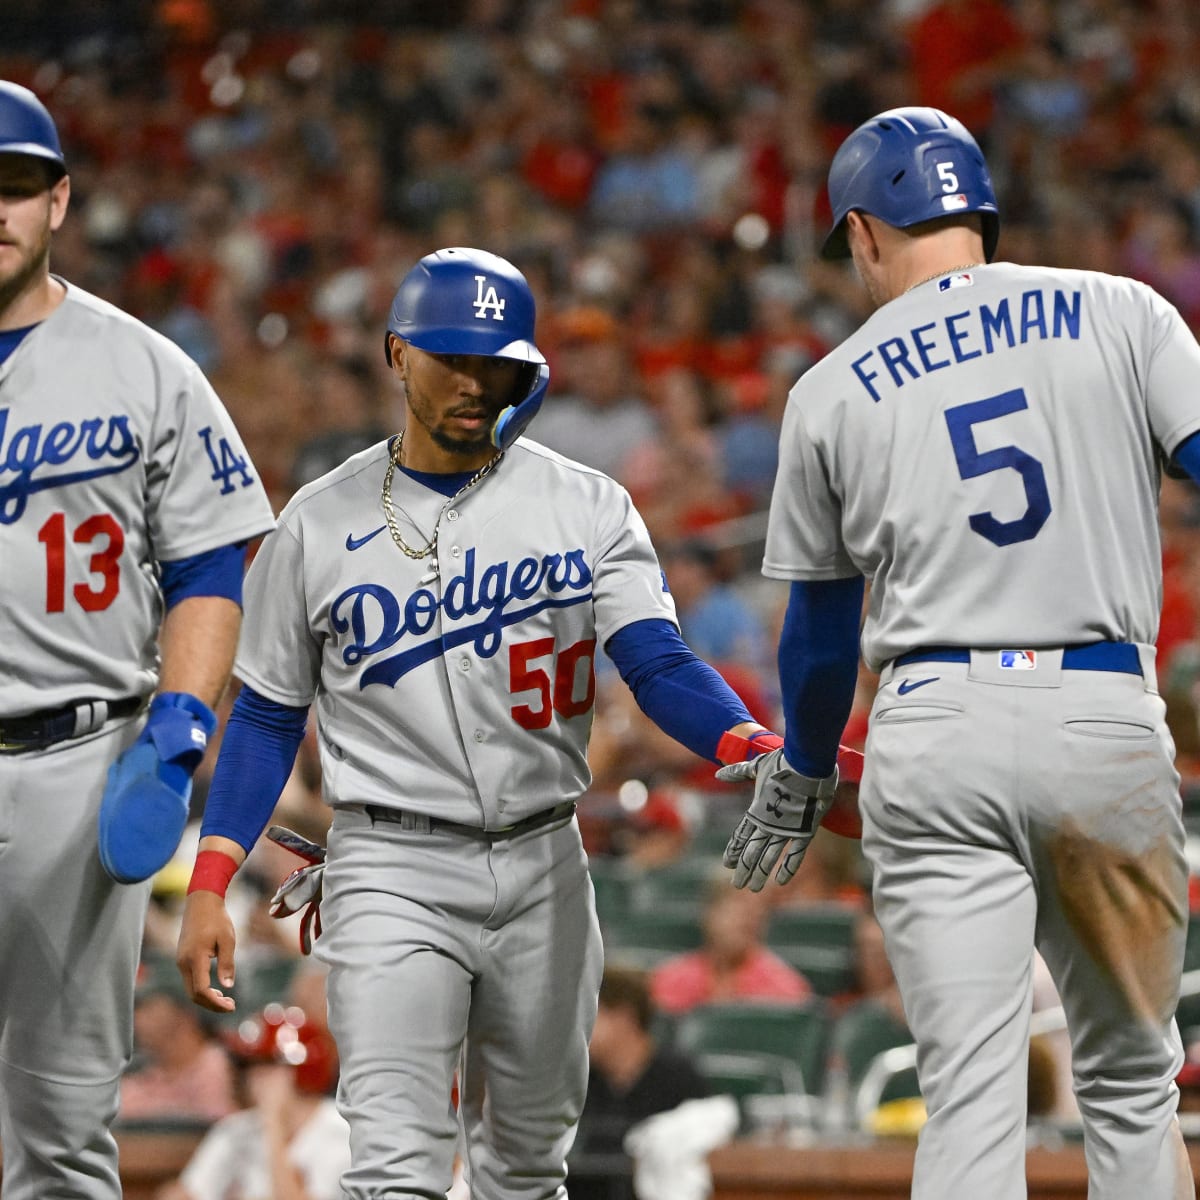 Offseason questions, free agency loom for Dodgers after shocking